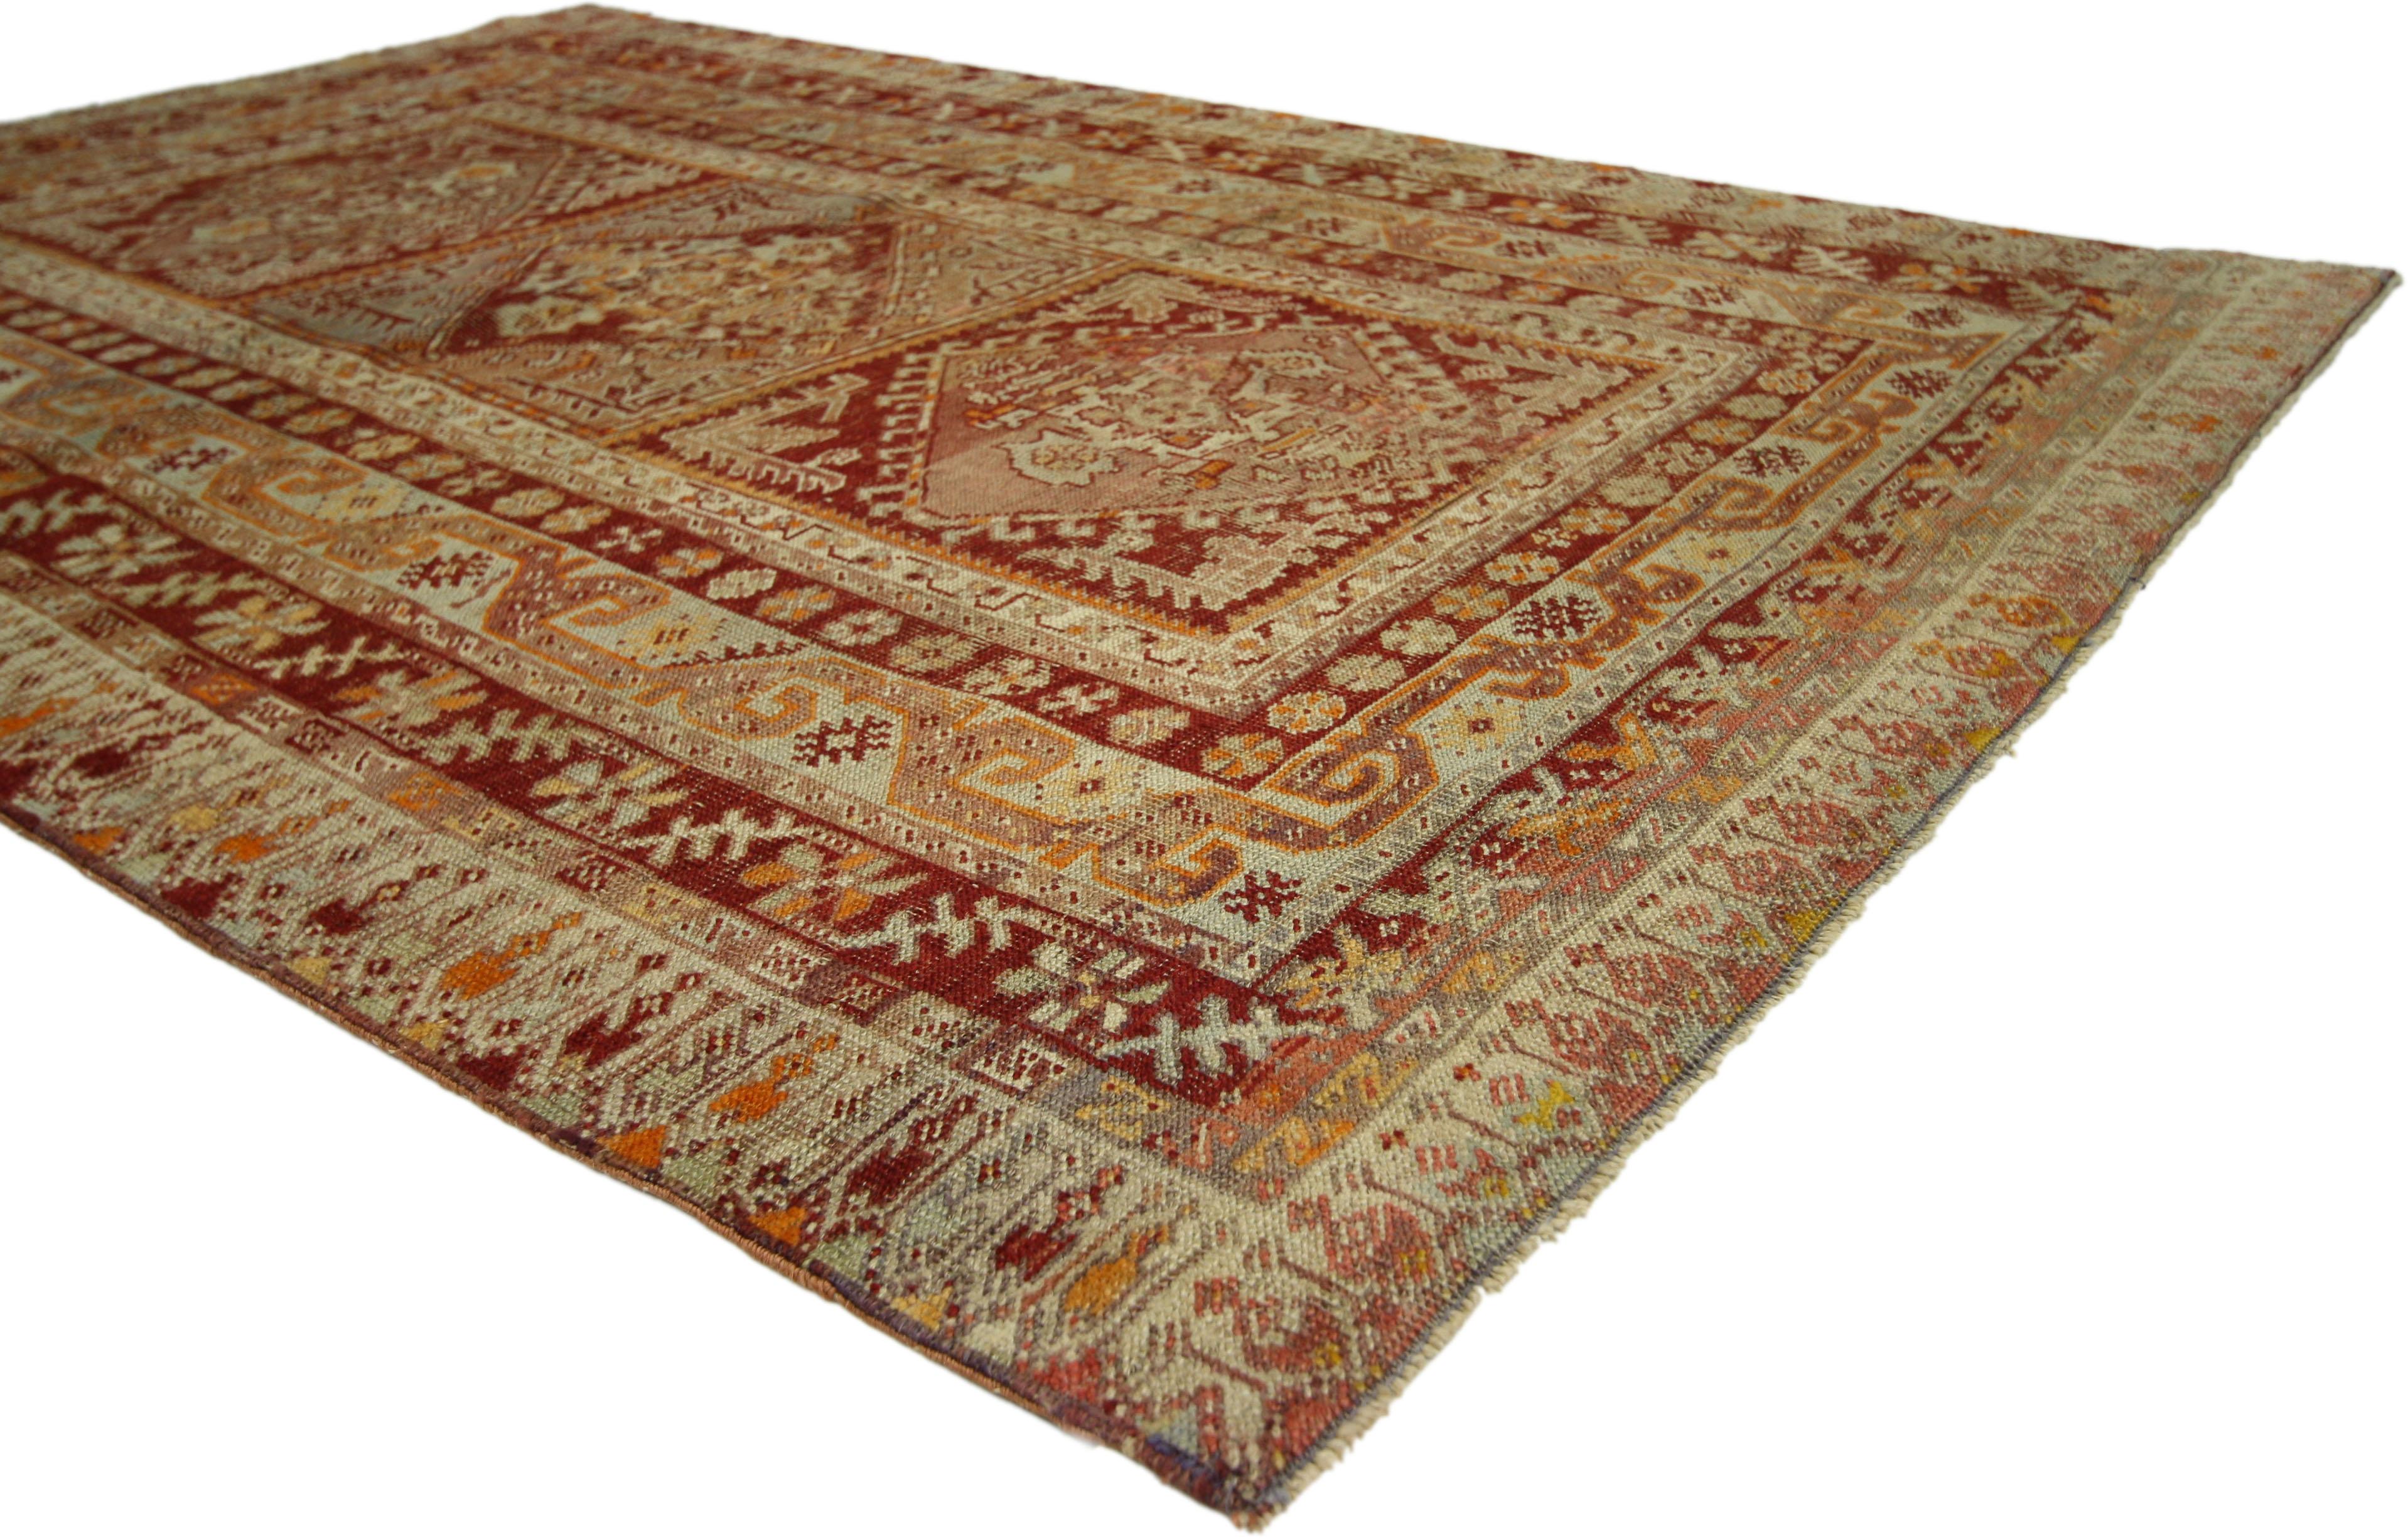 51724, vintage Turkish Oushak accent rug, entry or foyer rug. This vintage Turkish Oushak rug features a modern traditional style. Immersed in Anatolian history and refined colors, this vintage Oushak rug combines simplicity with sophistication.